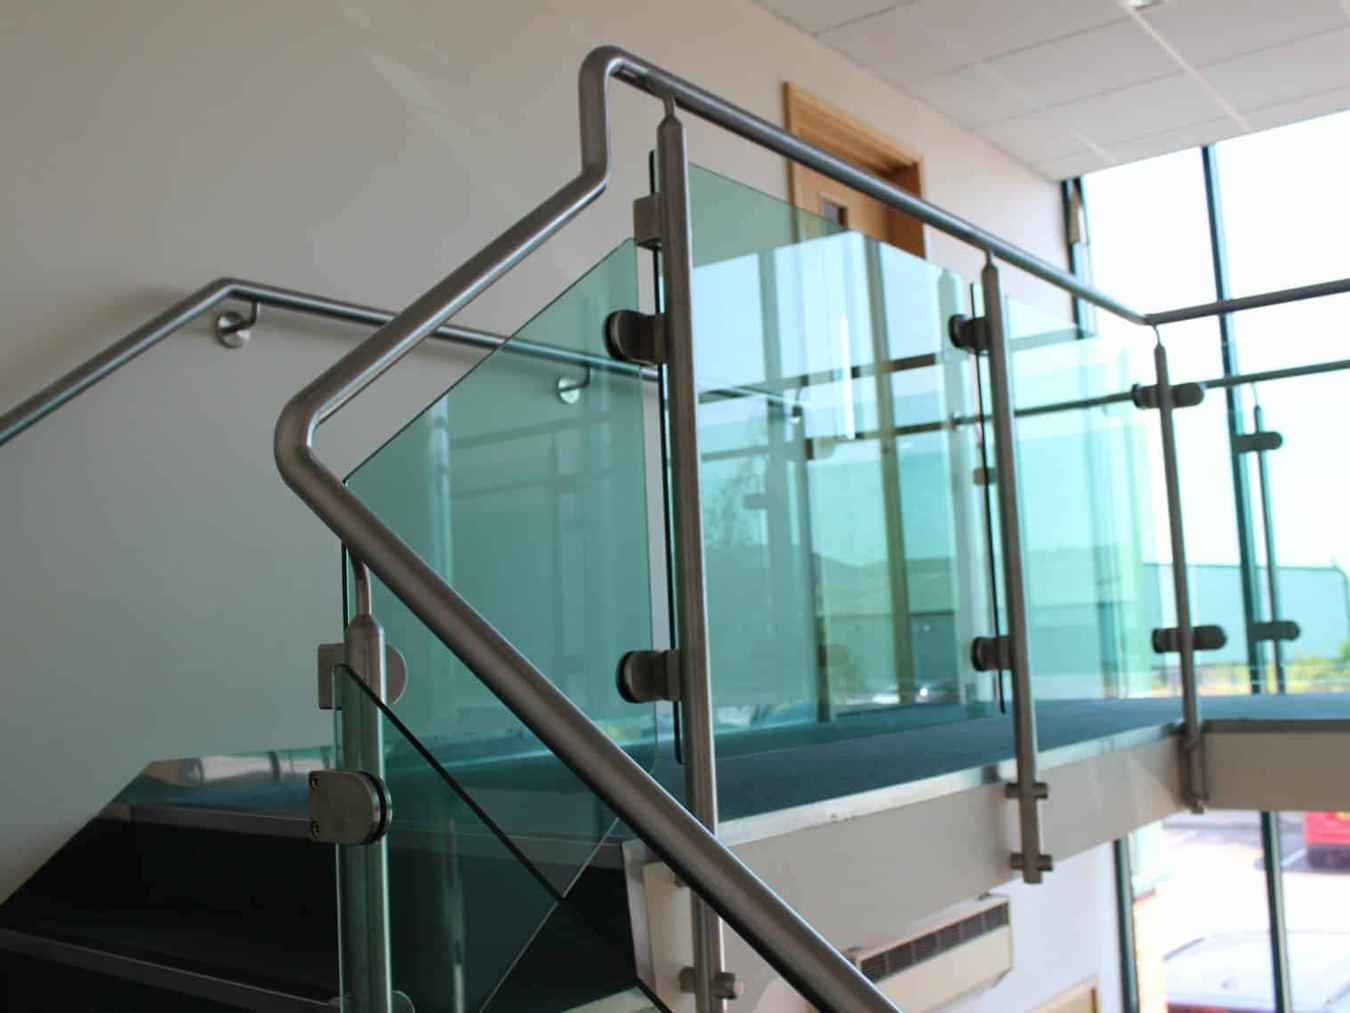 stainless steel handrail on staircase wrightfield